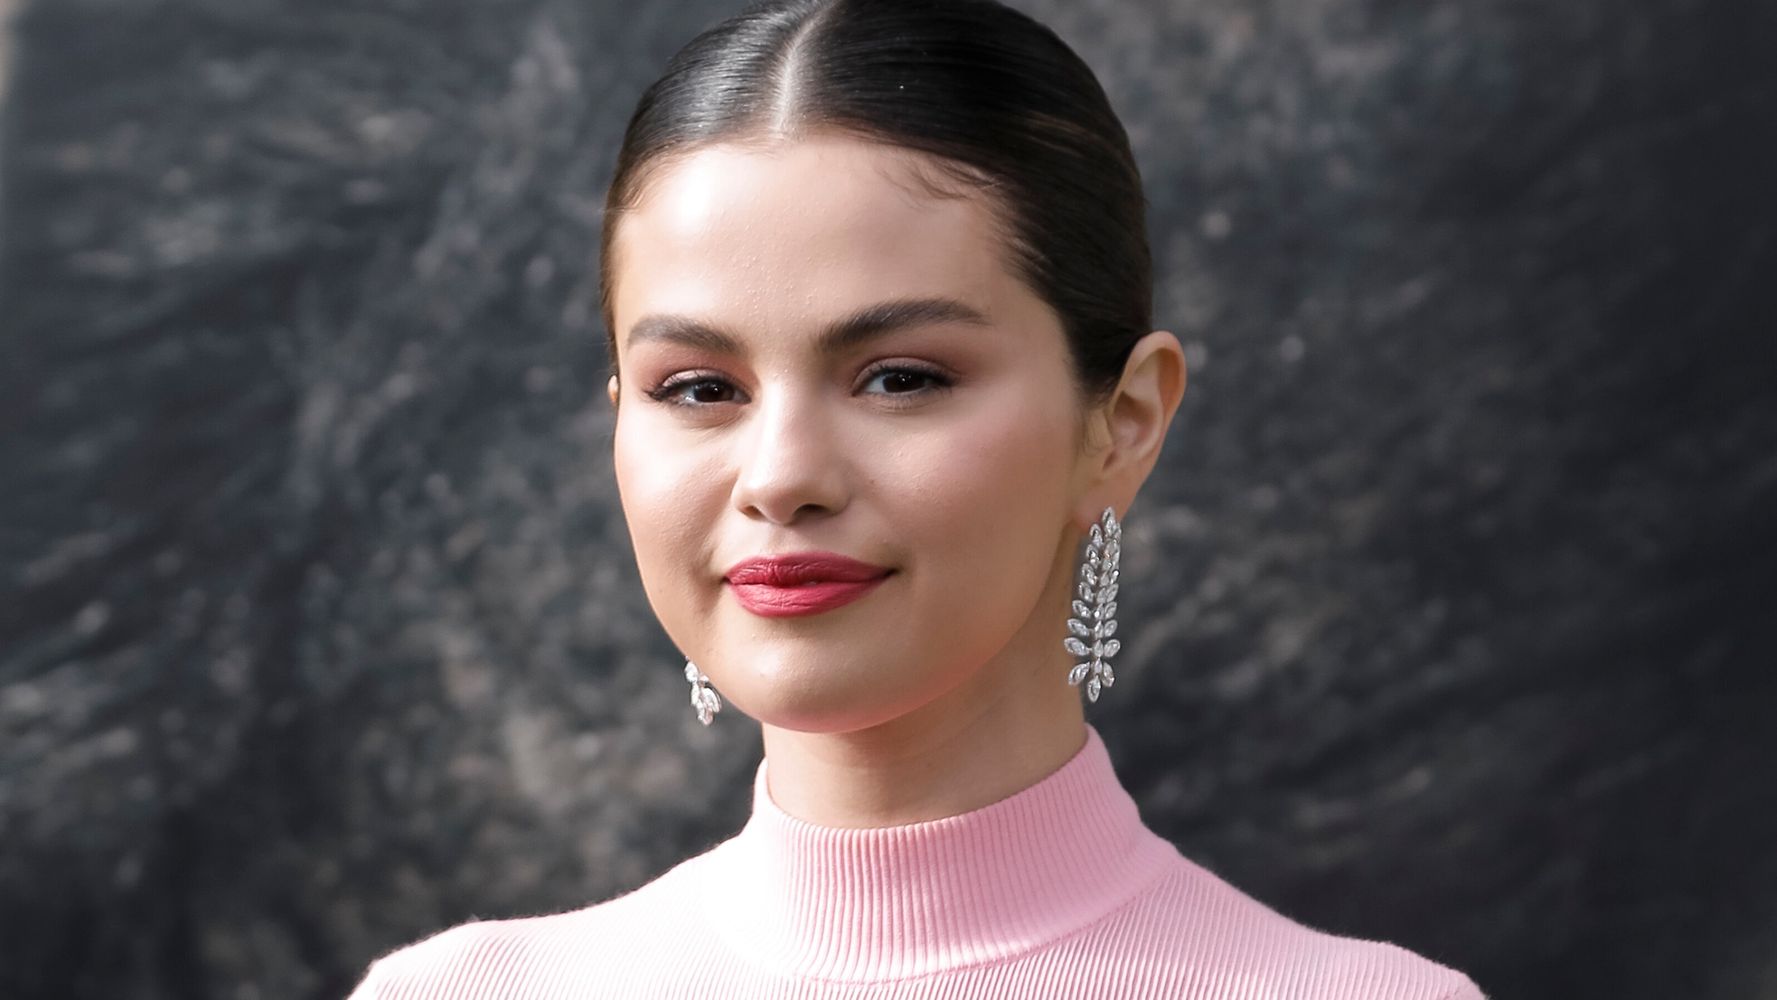 Selena Gomez Fans Shred ‘The Good Fight’ Over Line About Her Kidney Transplant